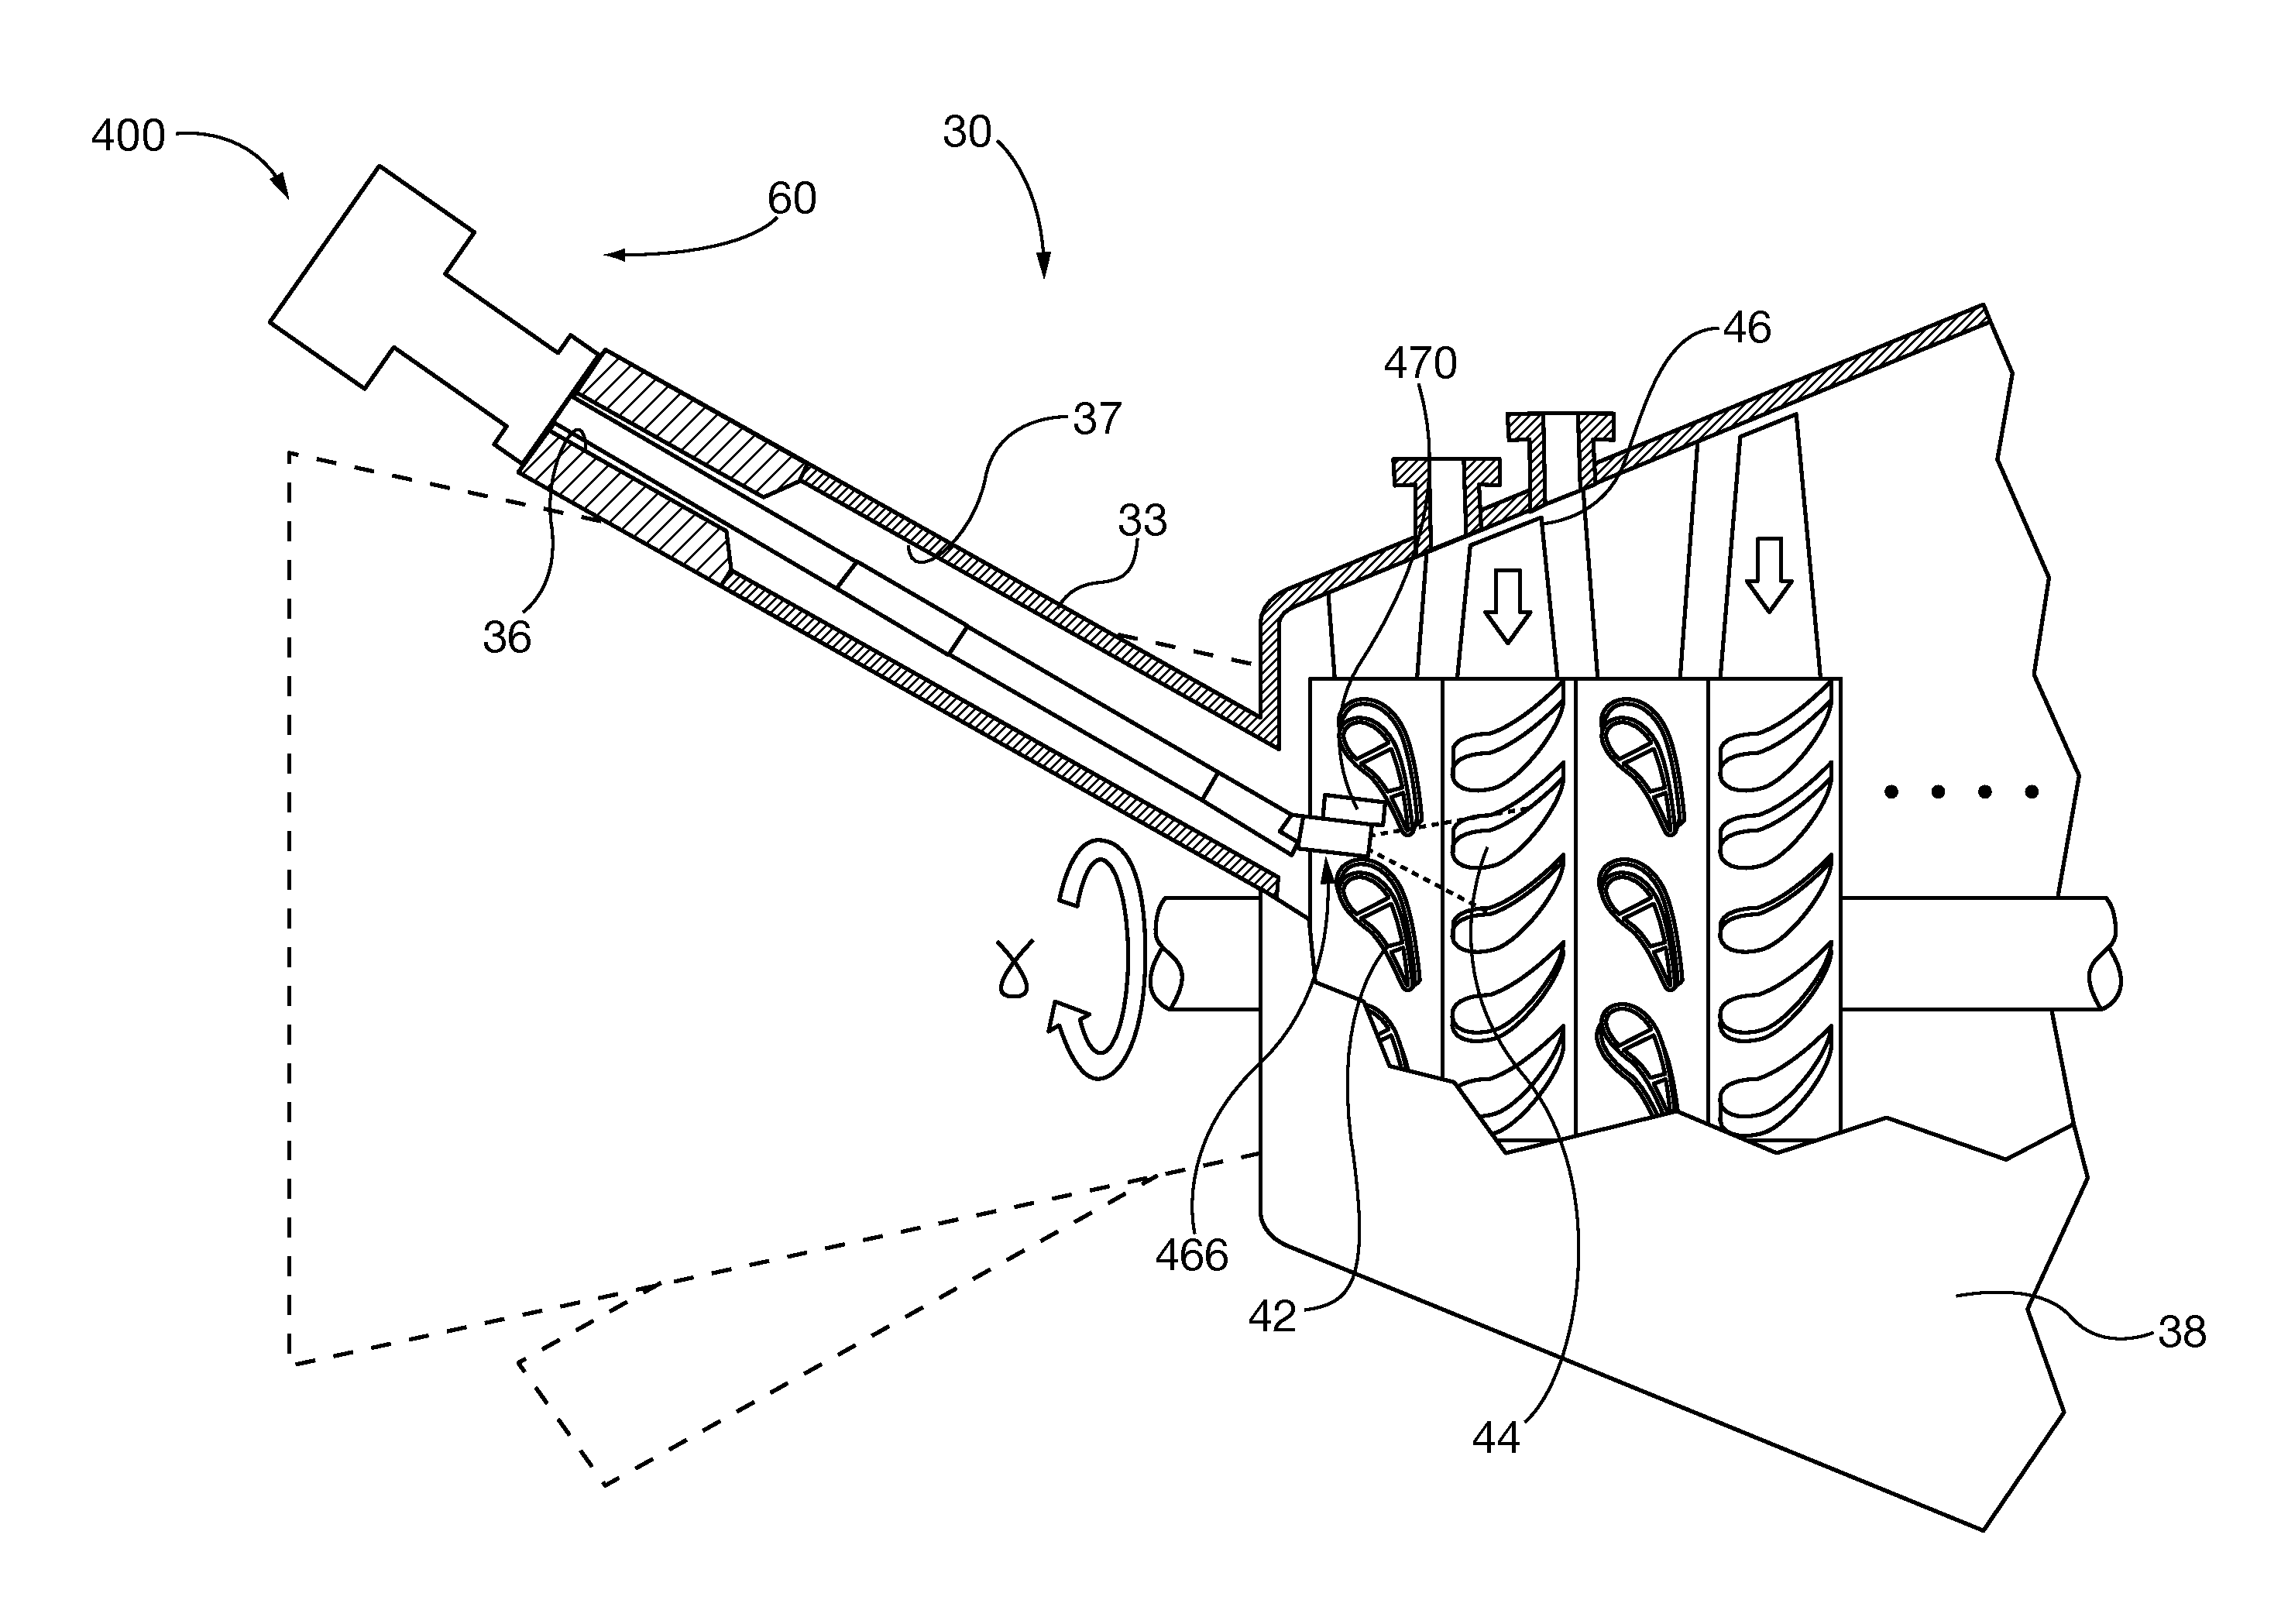 Method and system for surface profile inspection of off-line industrial gas turbines and other power generation machinery